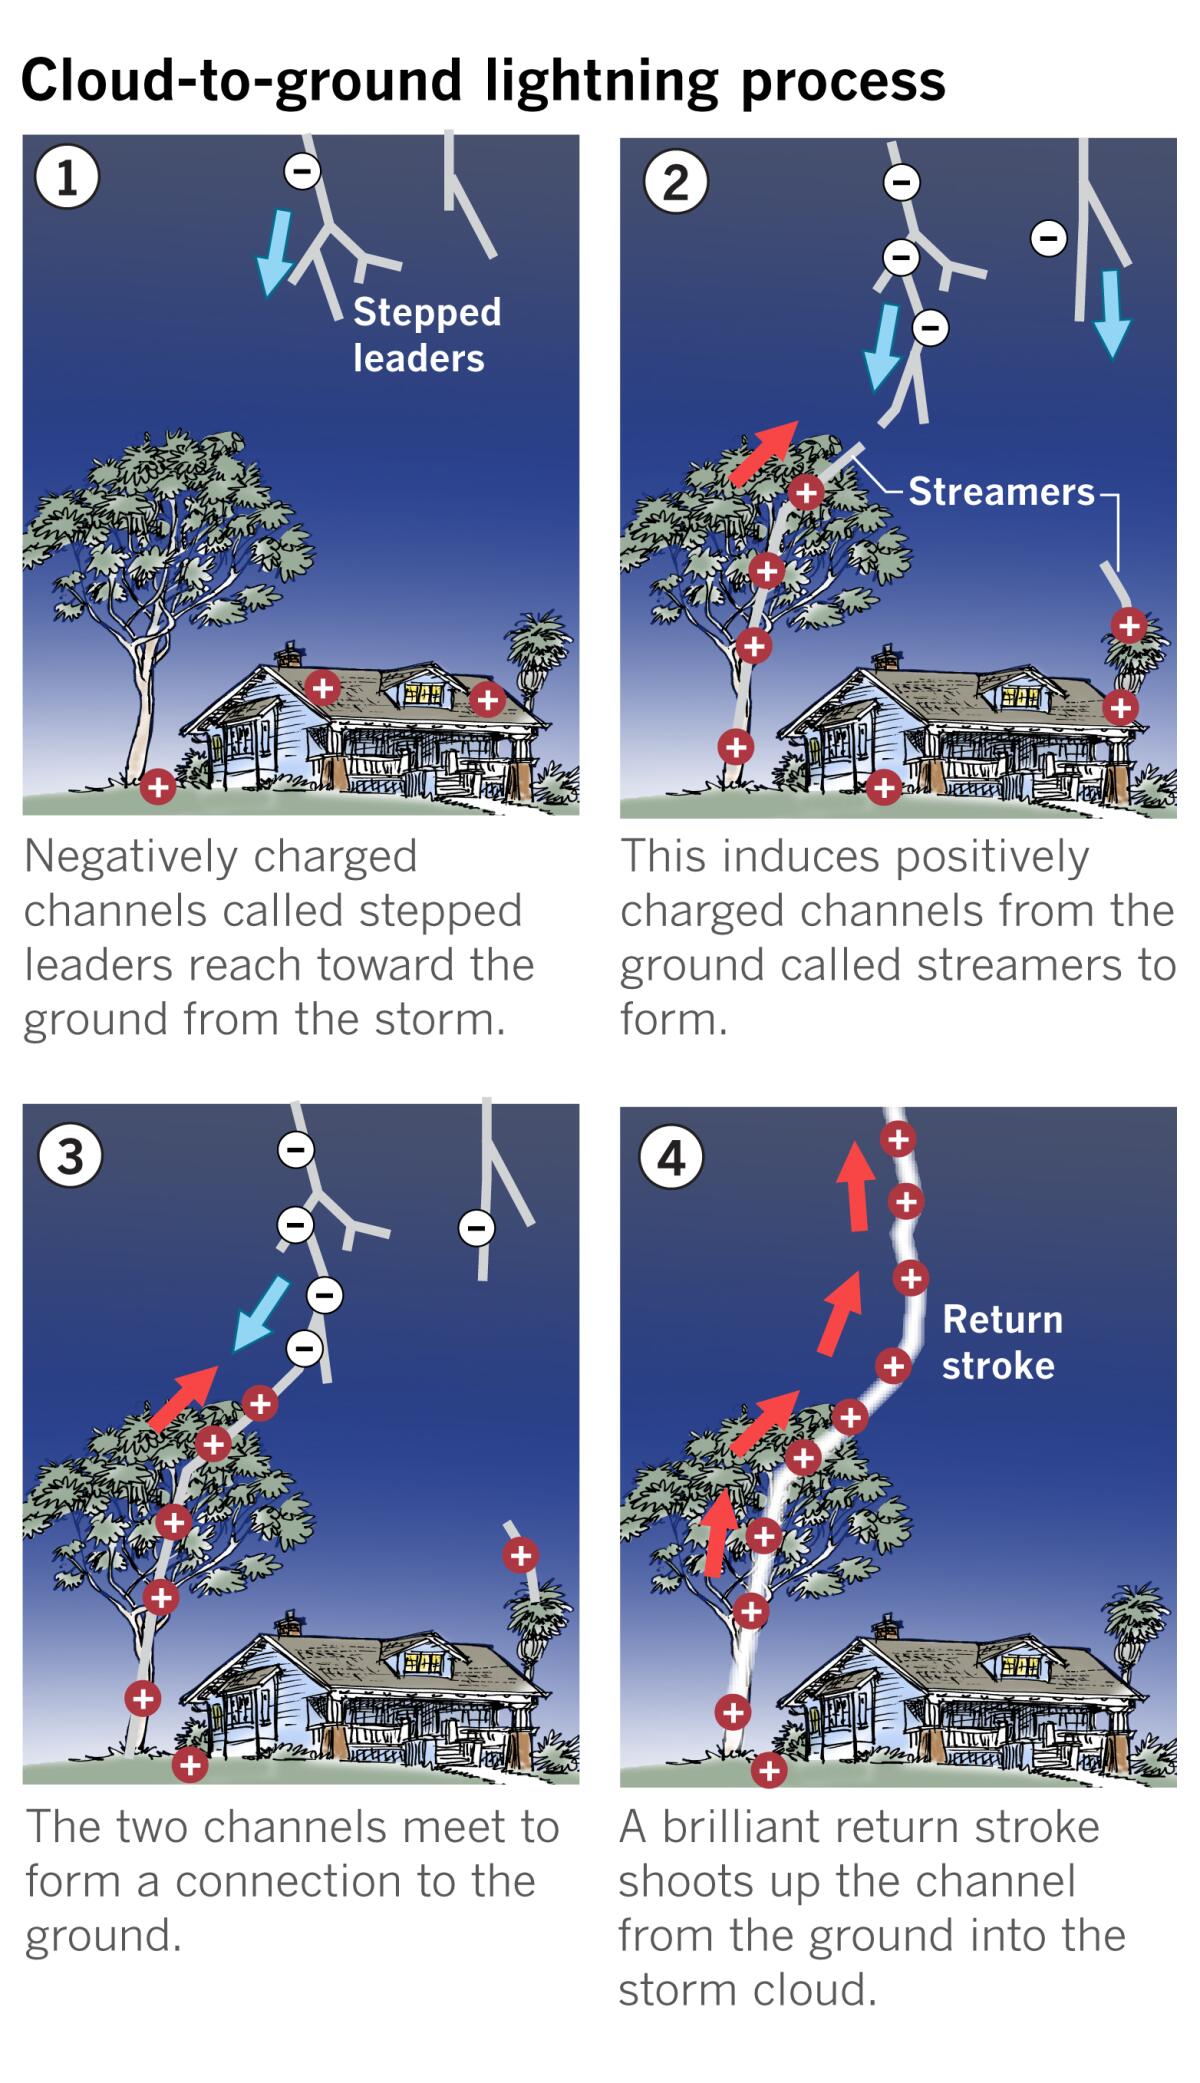 Scenario for negative cloud-to-ground lightning happens in fractions of a second.